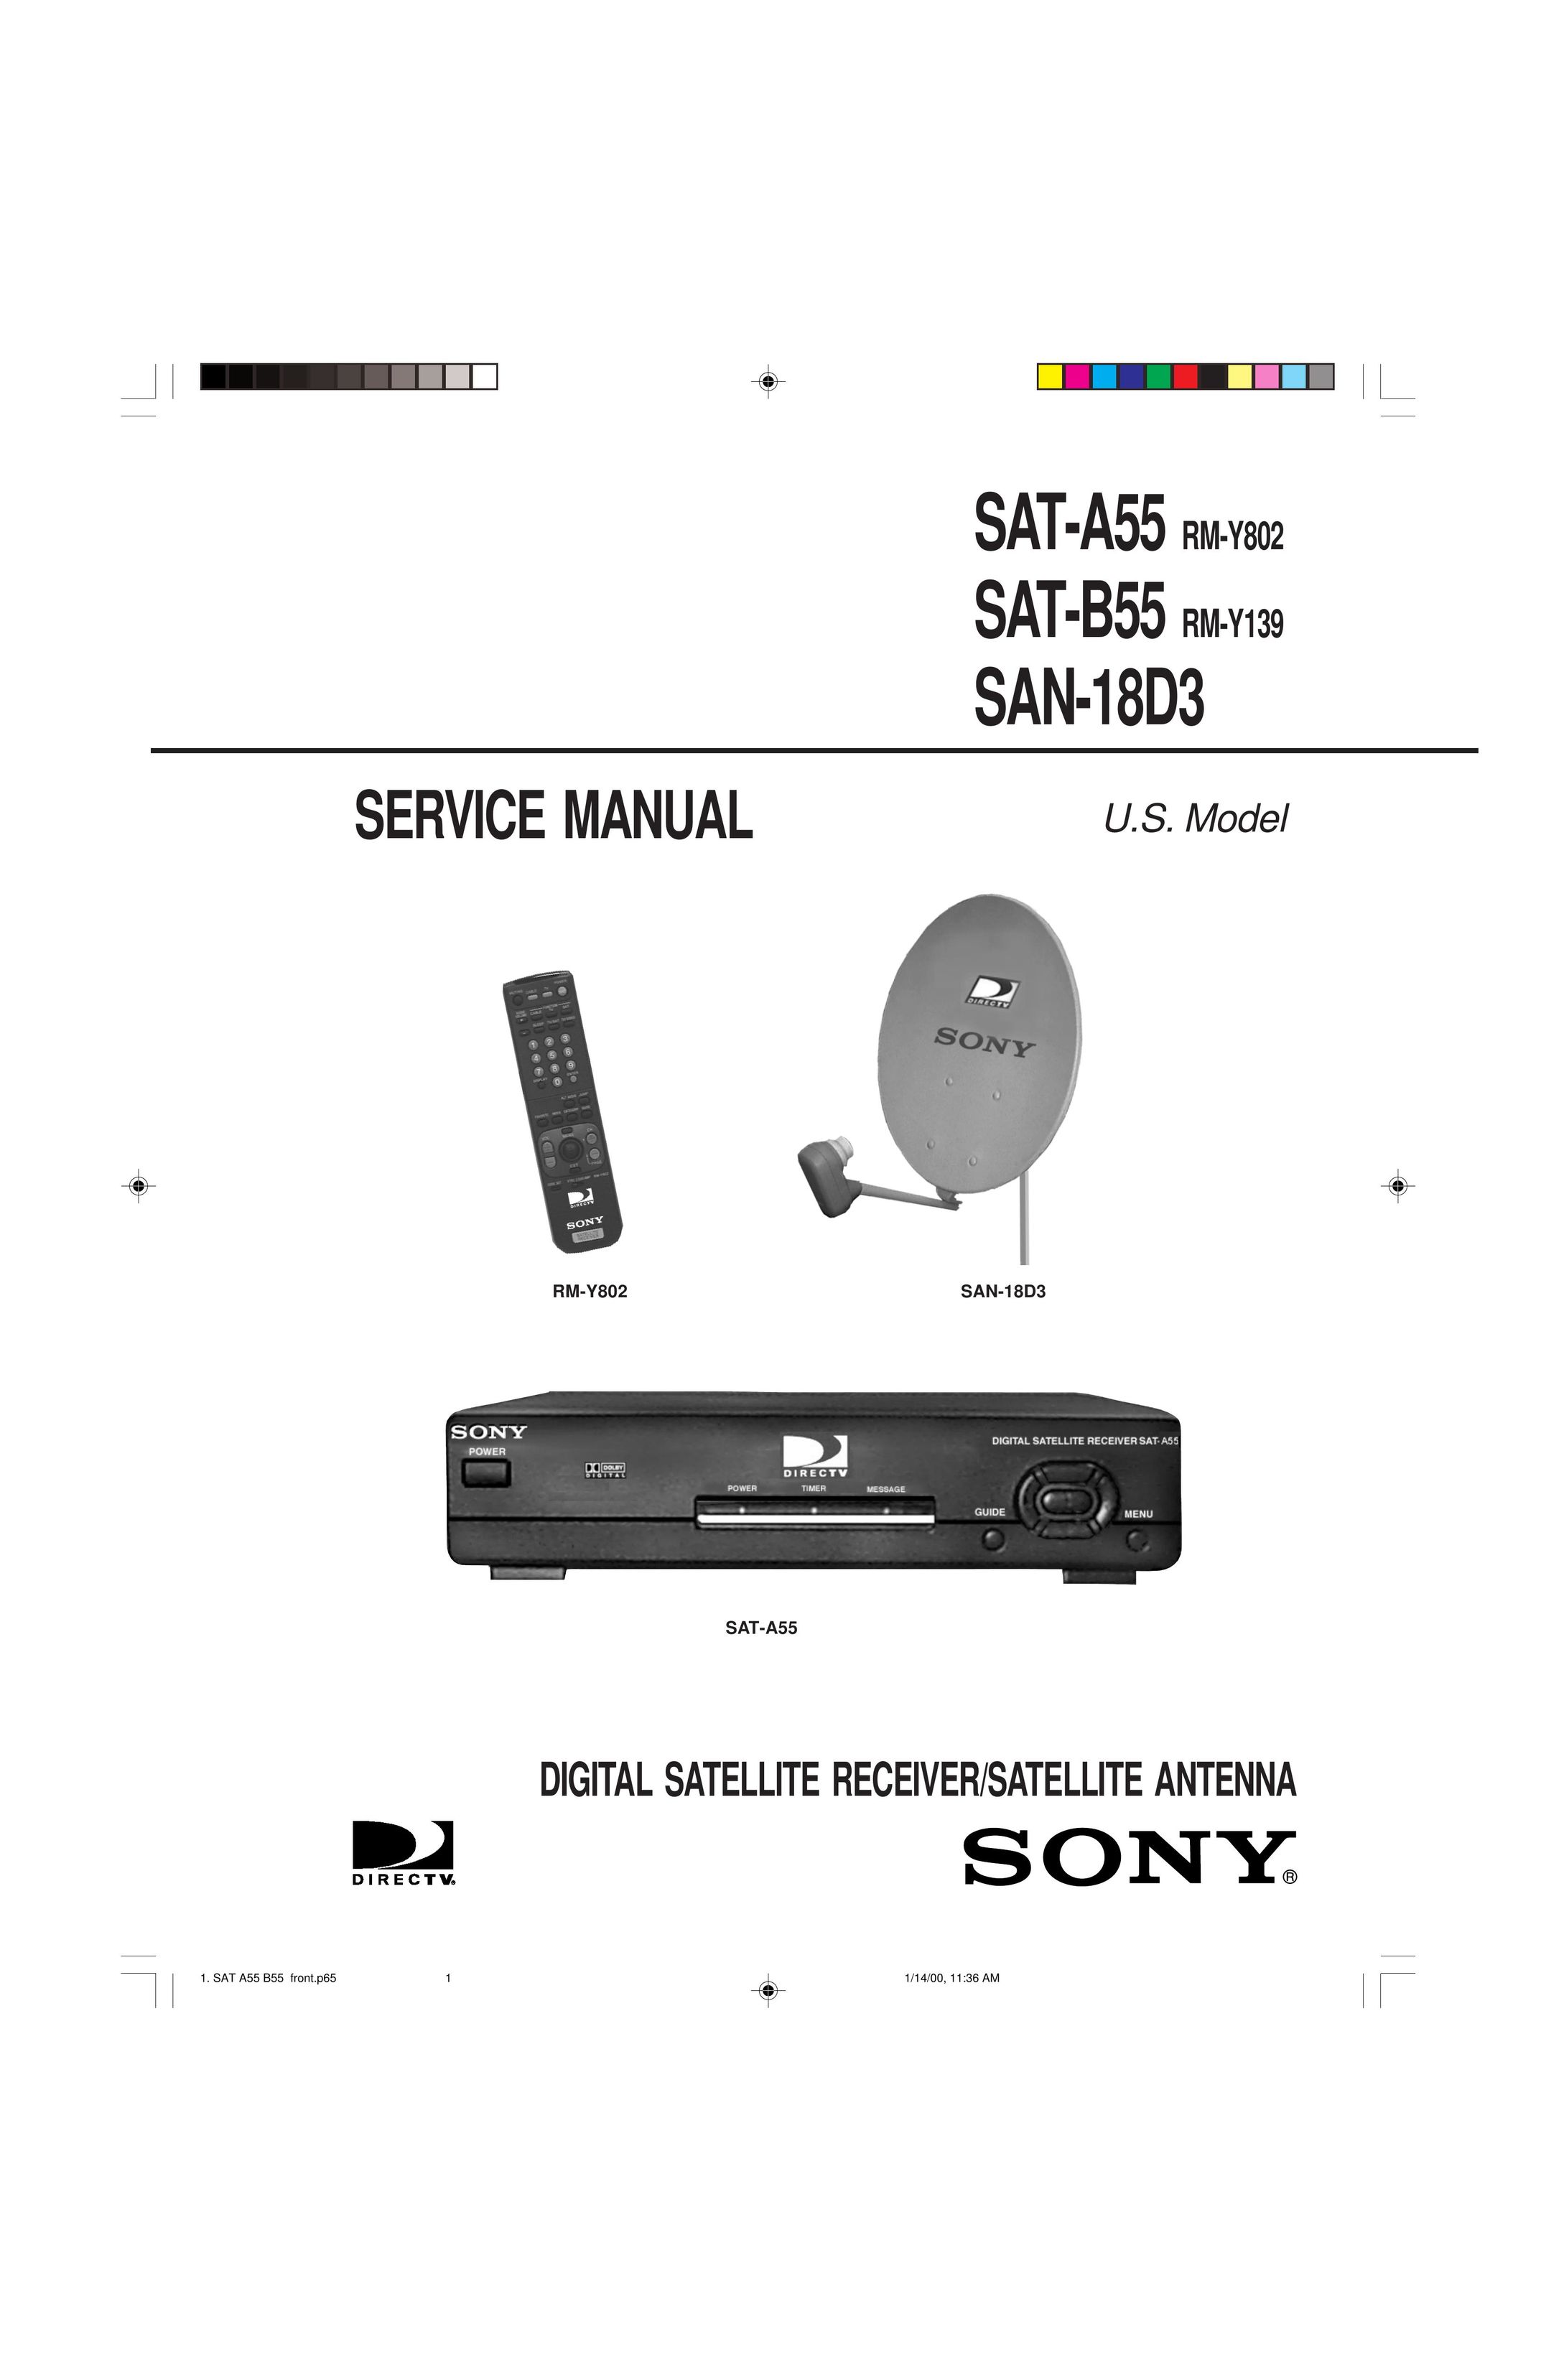 Sony SAT-A55 RM-Y802 Satellite TV System User Manual